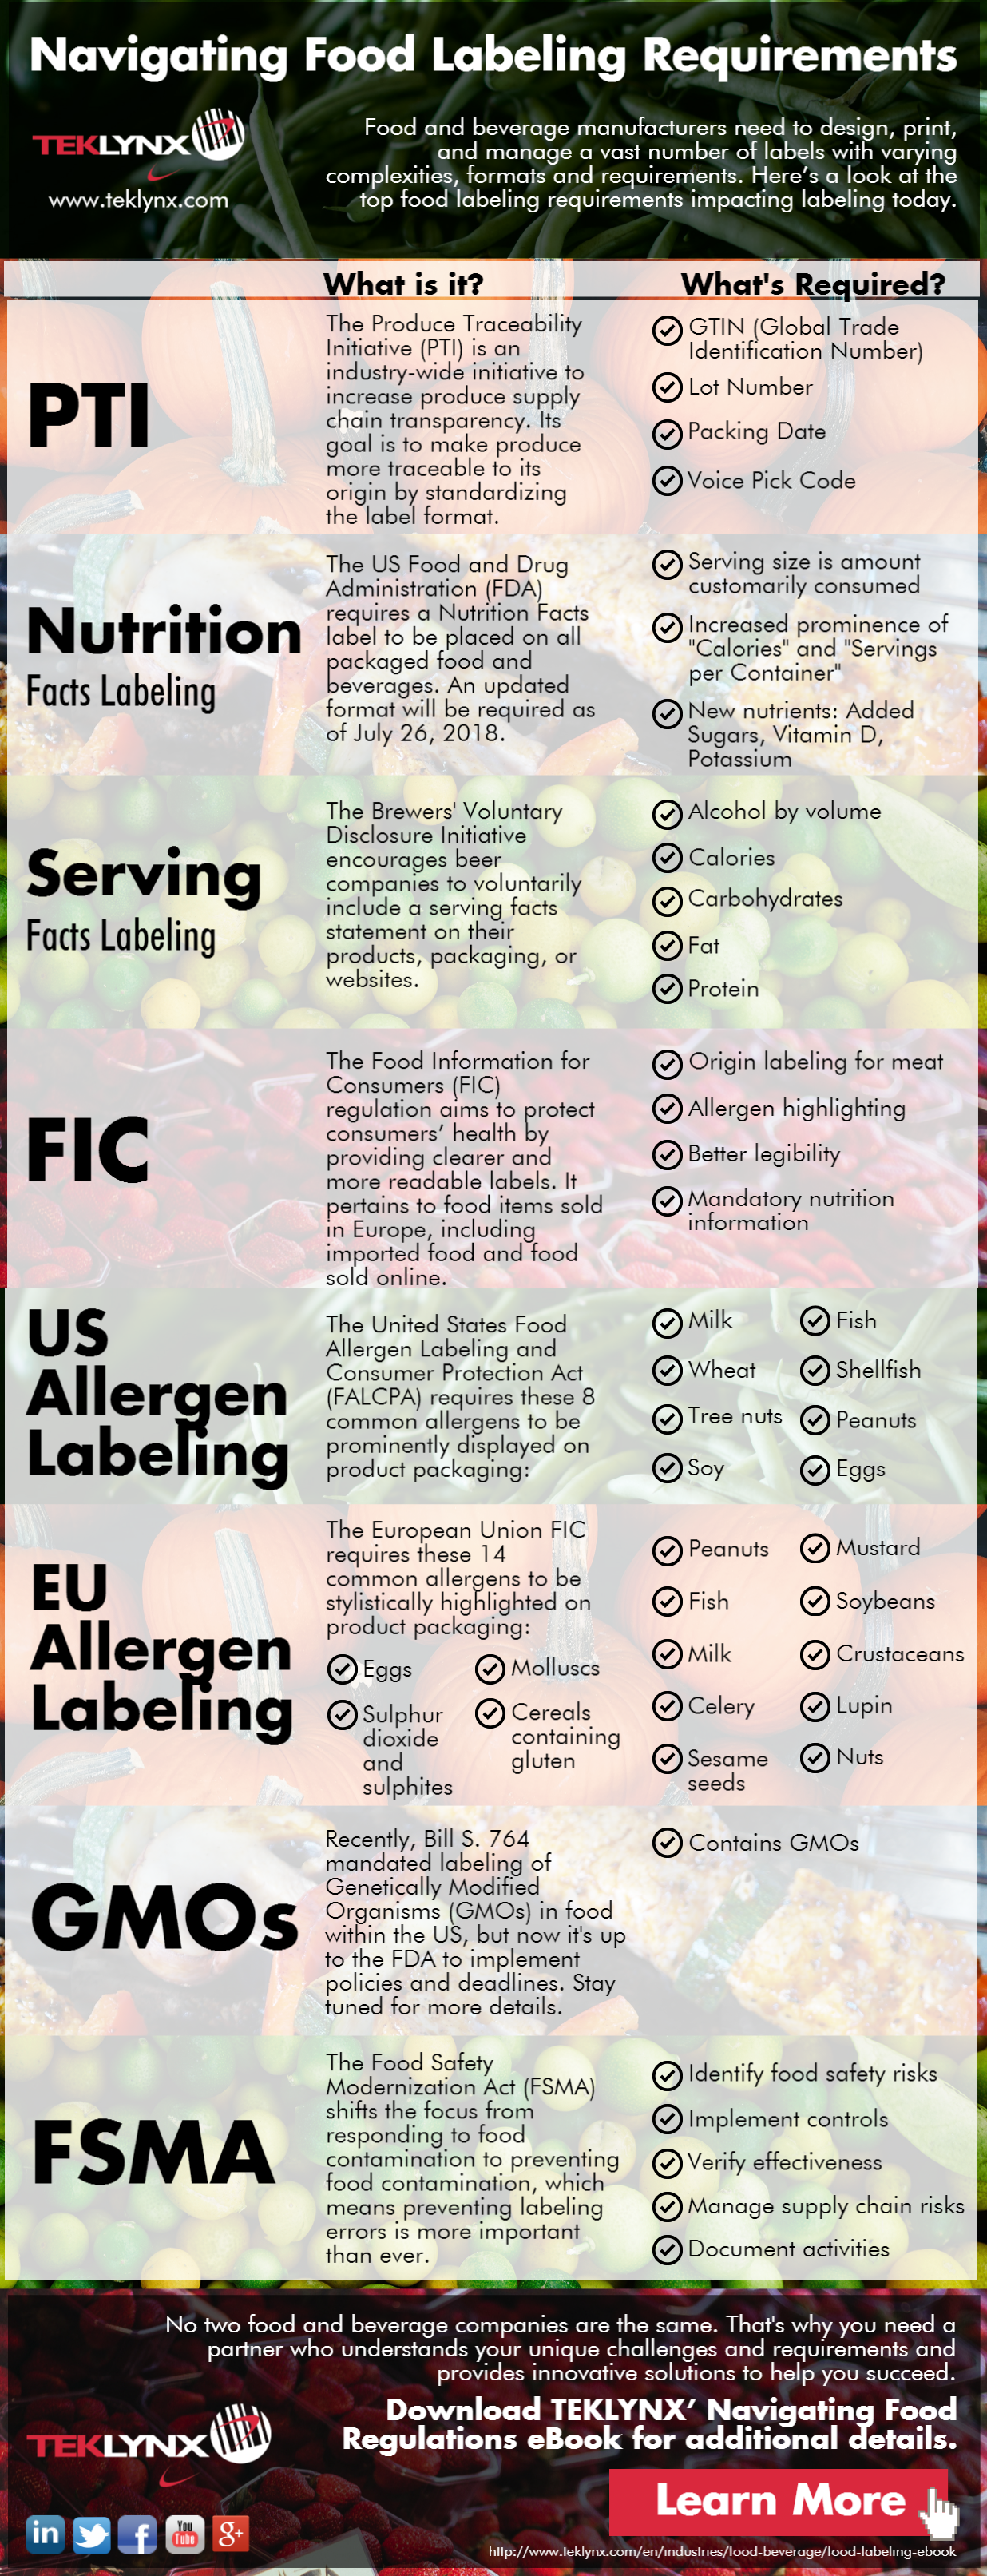 Infographic: Navigating Food Labeling Requirements